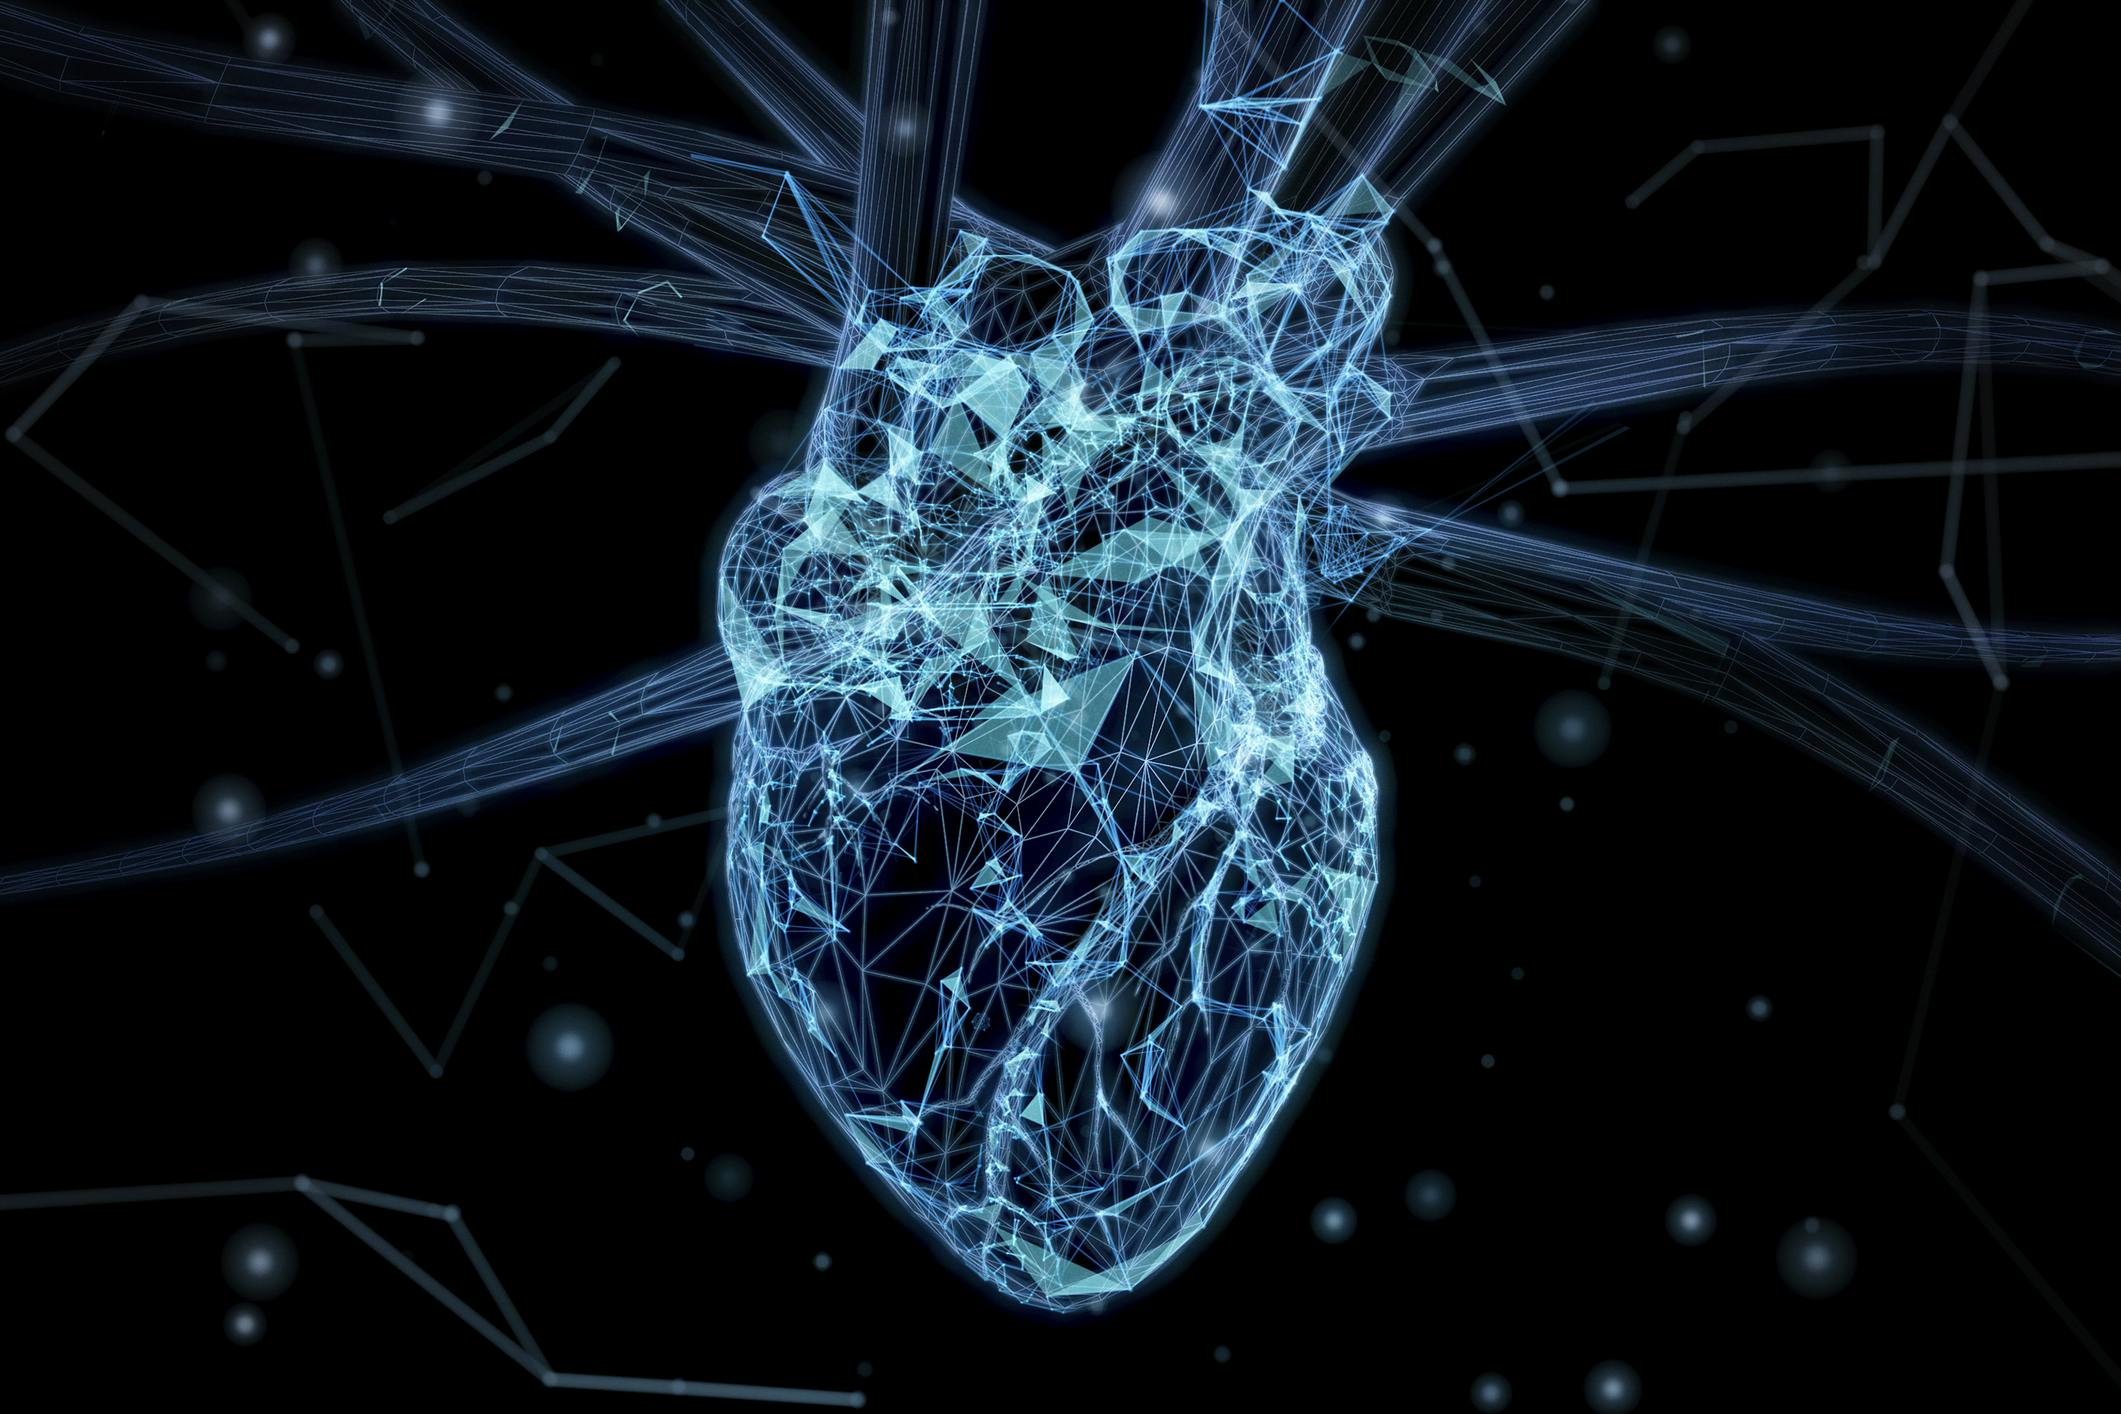 Stylised image of a human heart